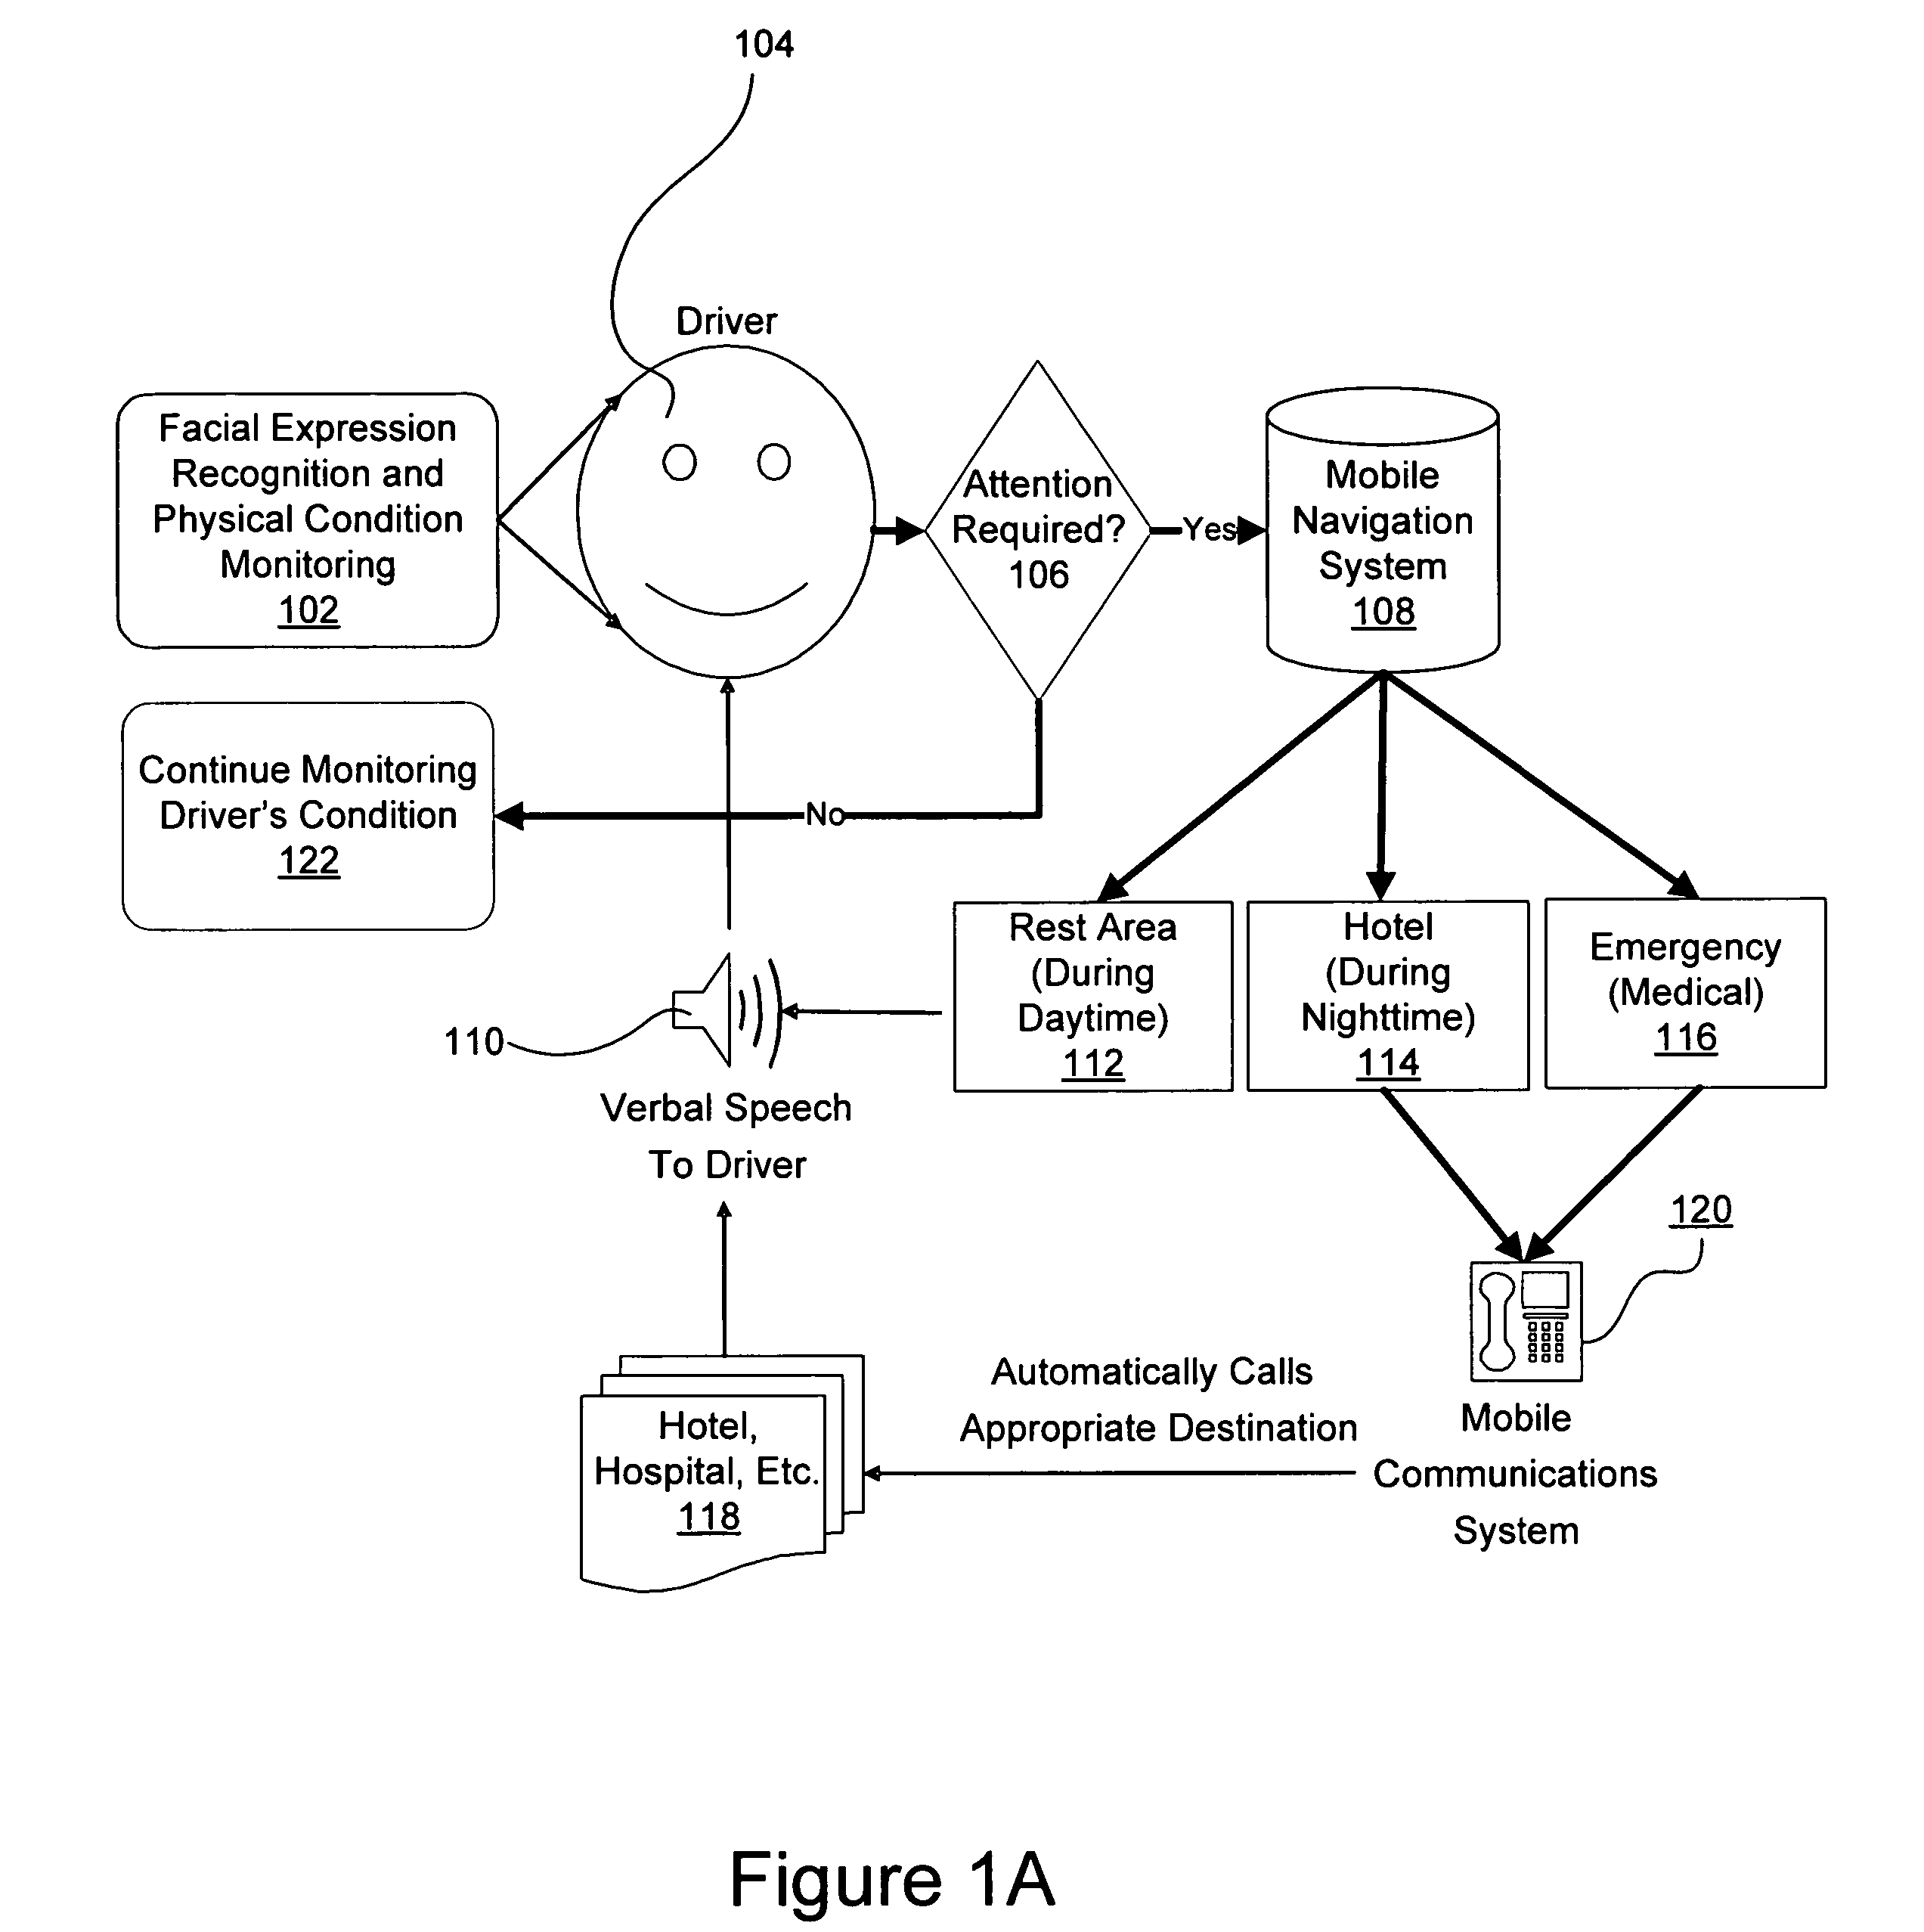 Process and method for safer vehicle navigation through facial gesture recognition and operator condition monitoring